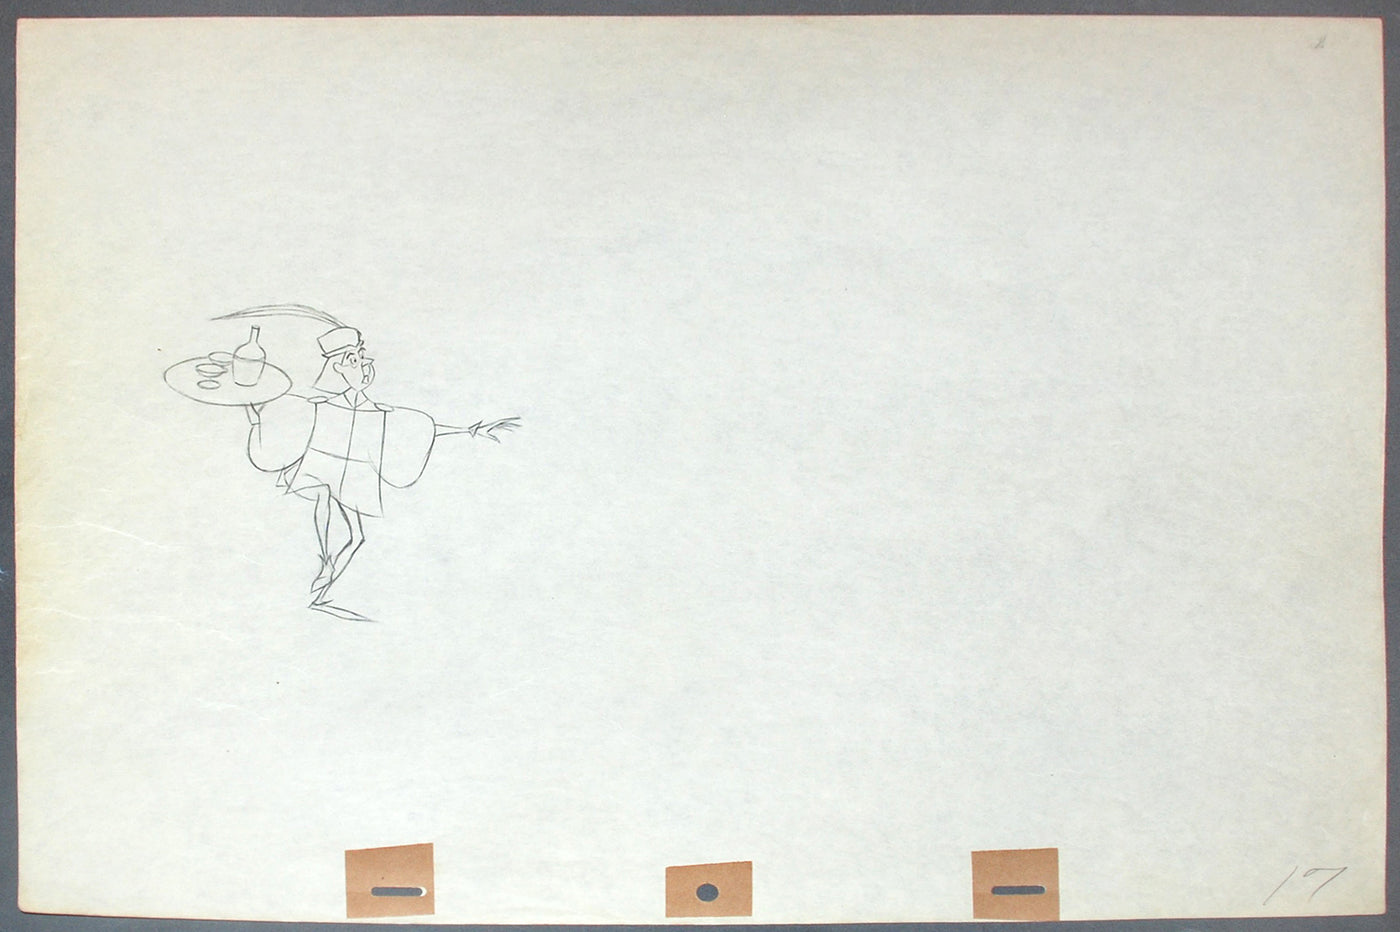 Original Walt Disney Production Drawing from Sleeping Beauty featuring the Lackey